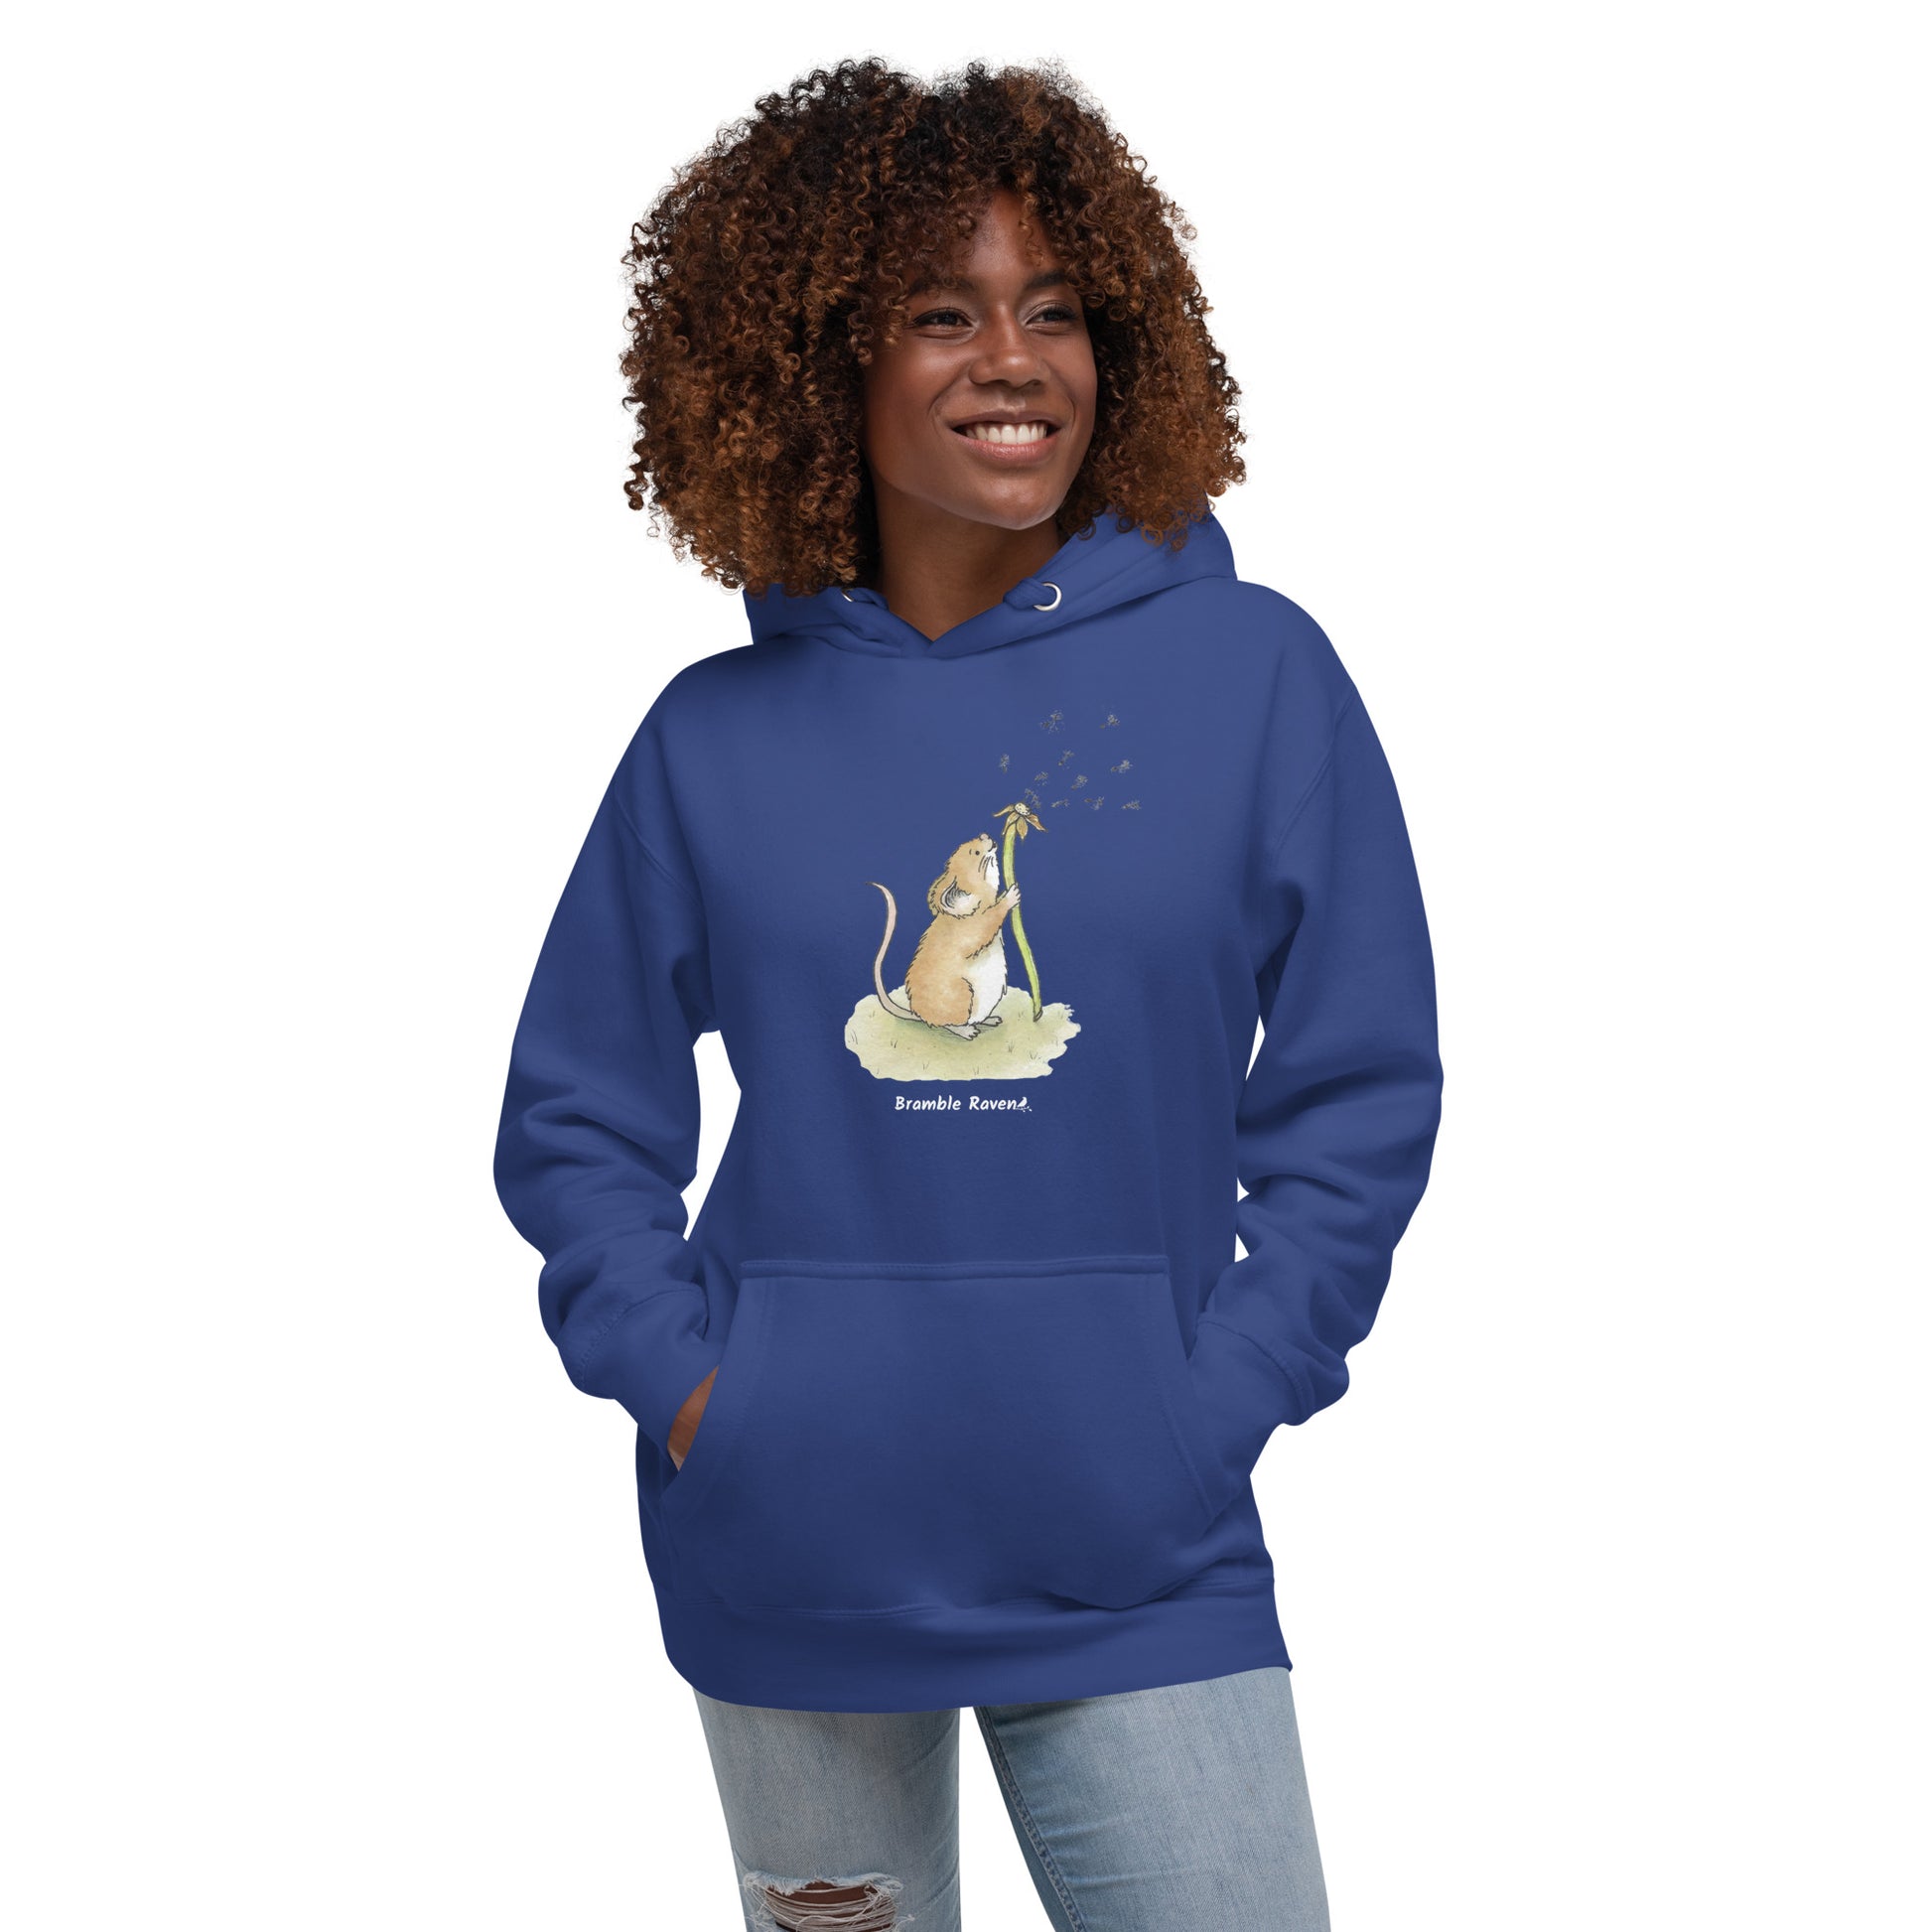 Original Dandelion wish design of cute watercolor mouse blowing dandelion seeds  featured on unisex royal blue colored hoodie shown on female model